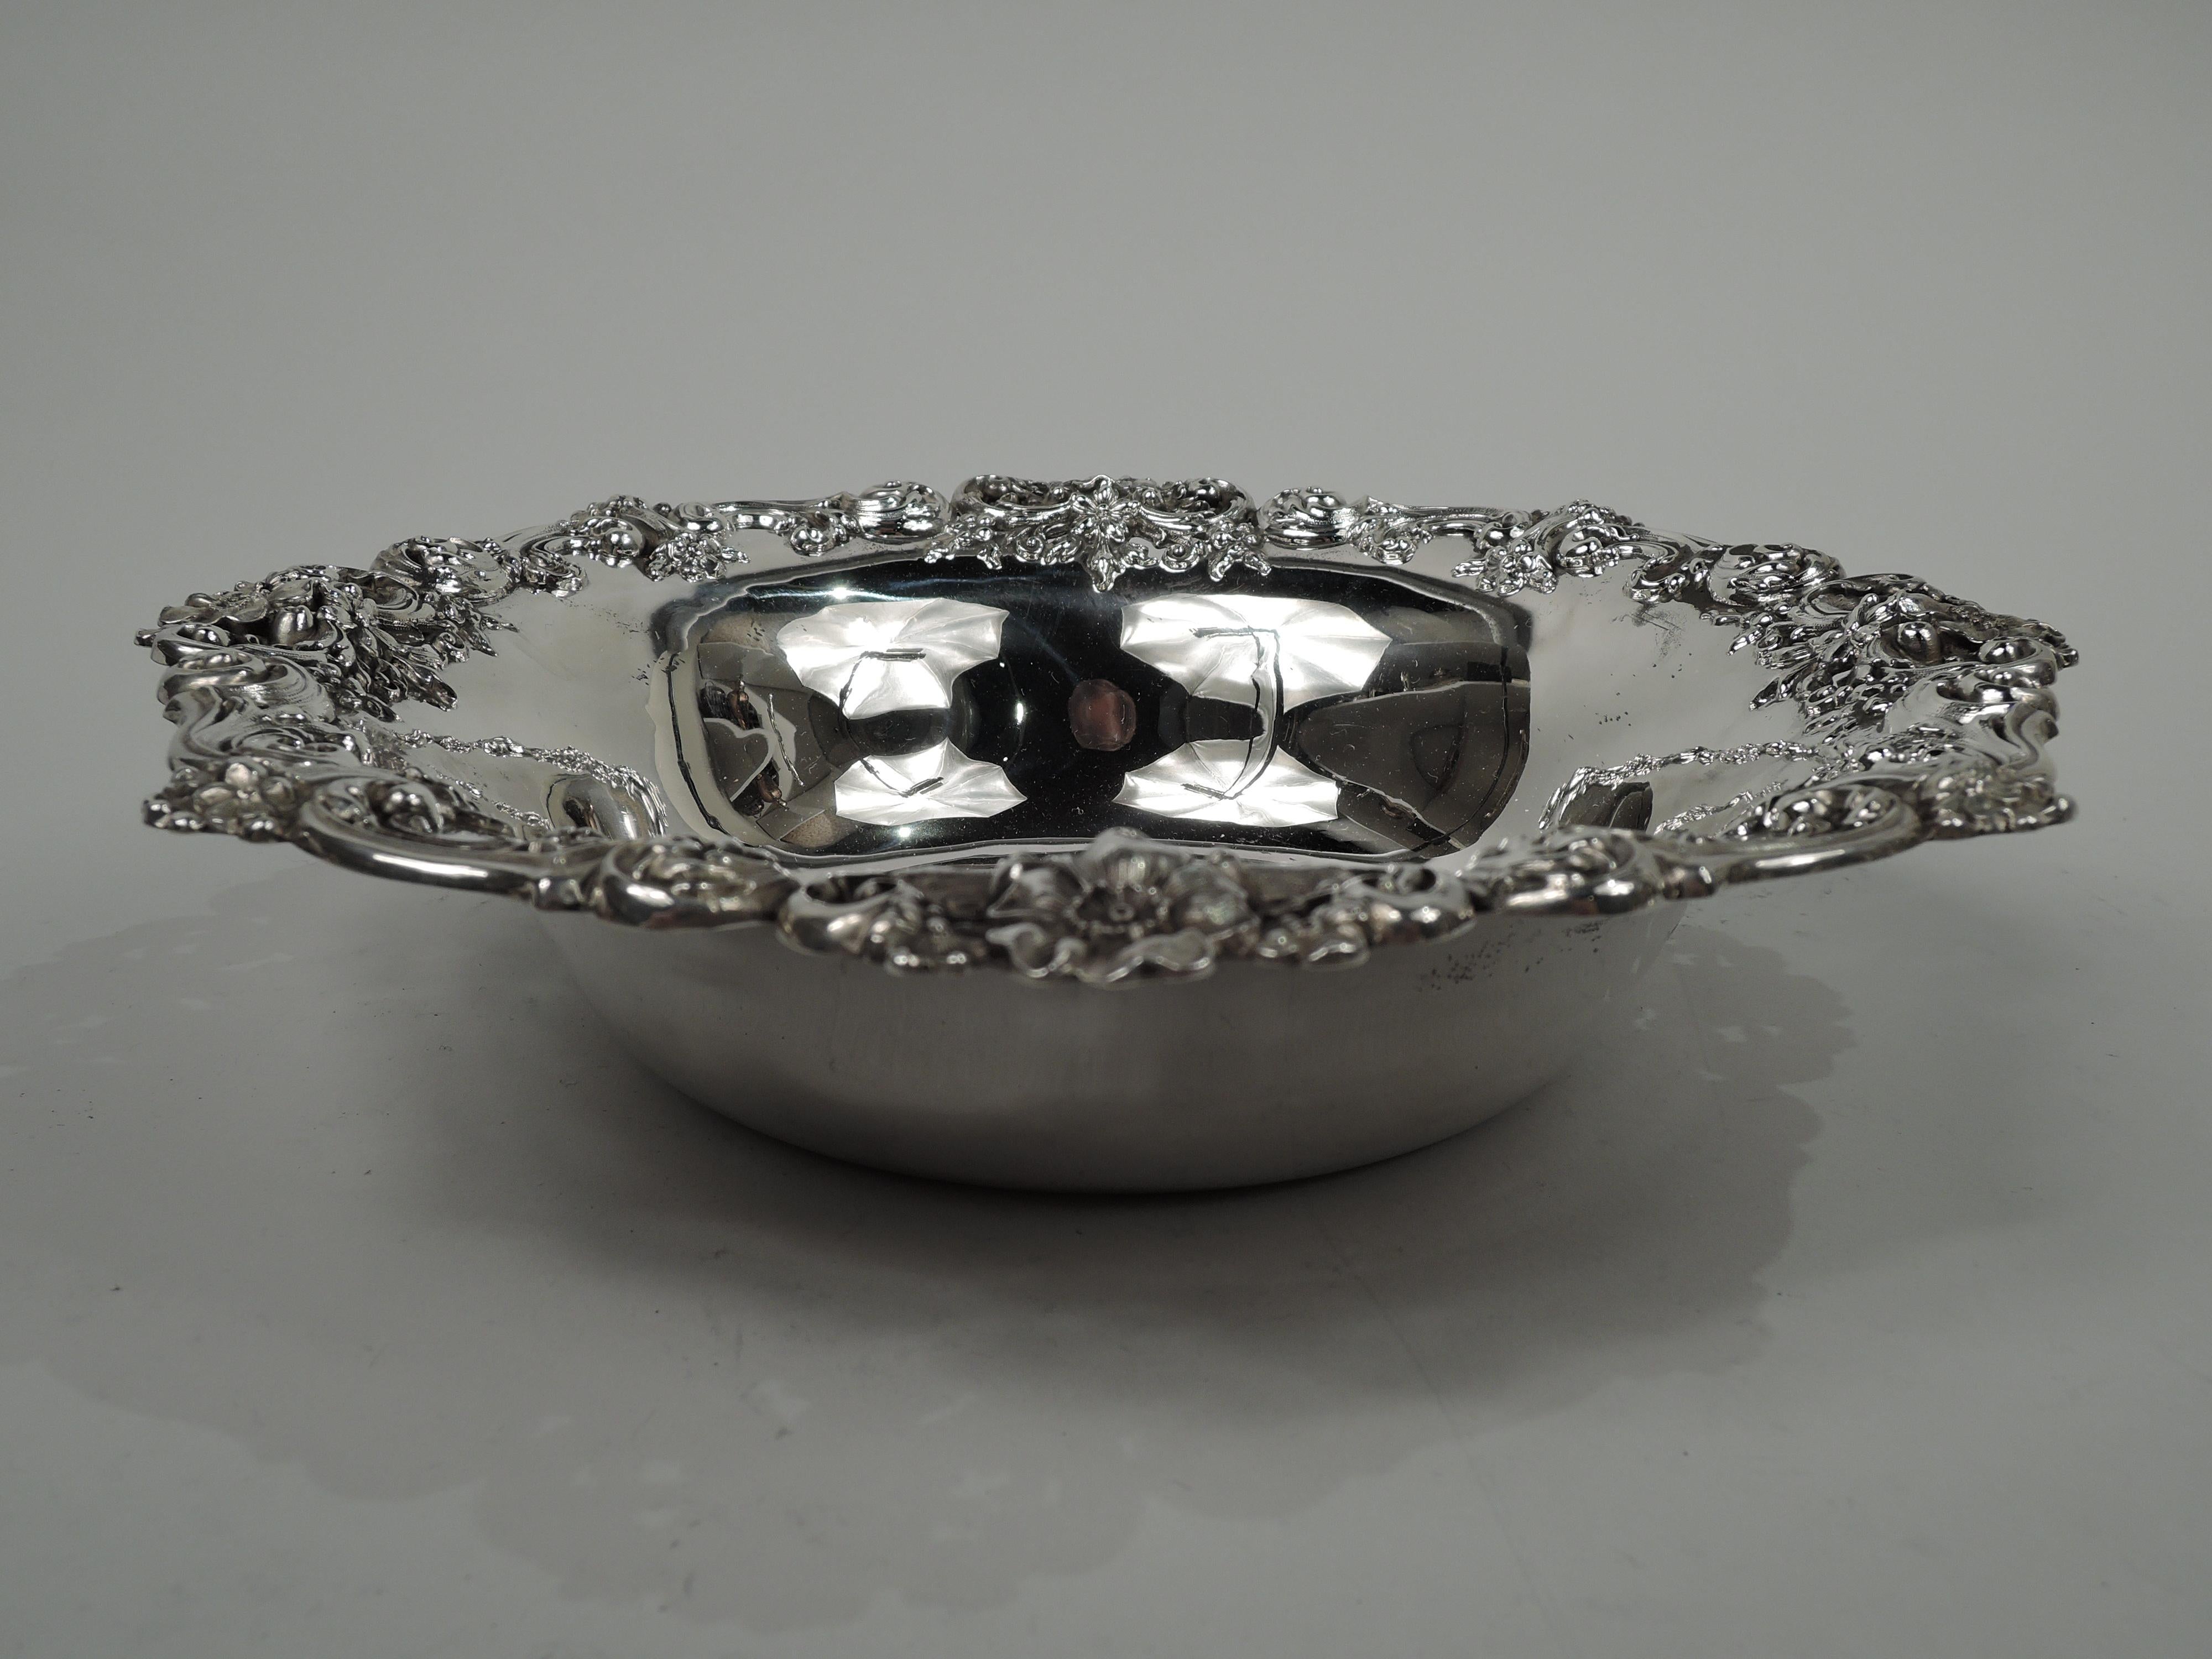 Edwardian Classical sterling silver bowl. Made by Redlich & Co. in New York, circa 1900. Tapering sides and flared rim; applied and pierced rim with cast leafing scrolls and flowers. Fully marked including maker’s and retailer’s (Cowell & Hubbard)